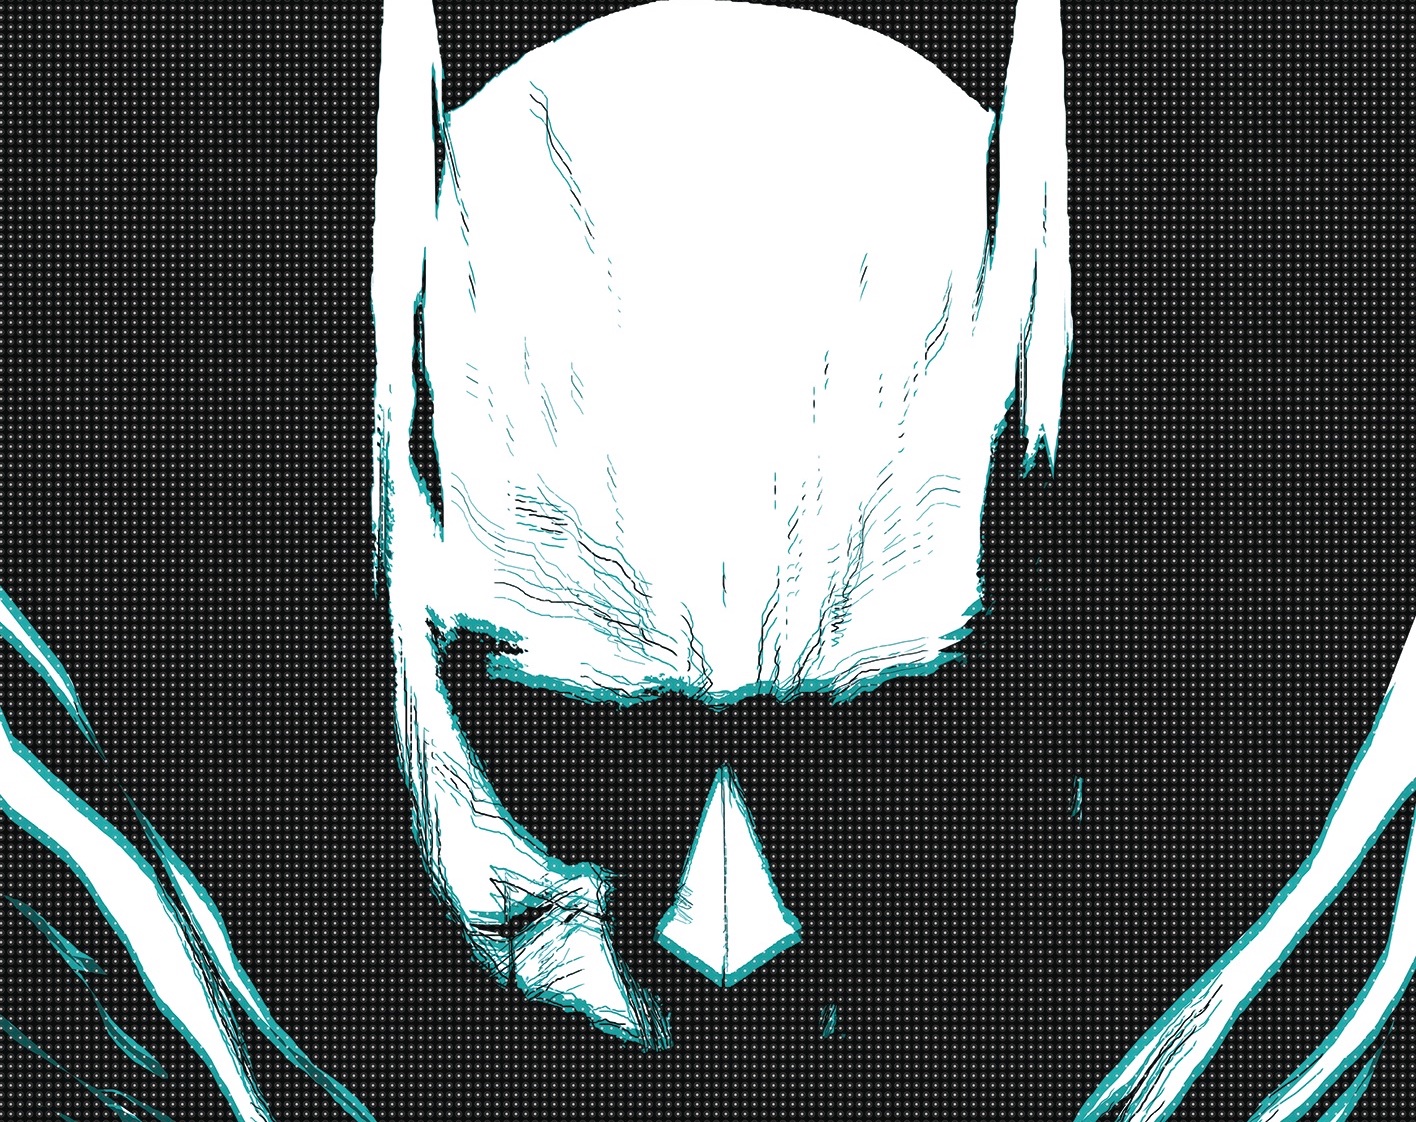 DC First Look: Batman: The Smile Killer #1 - Out June 23, 2020